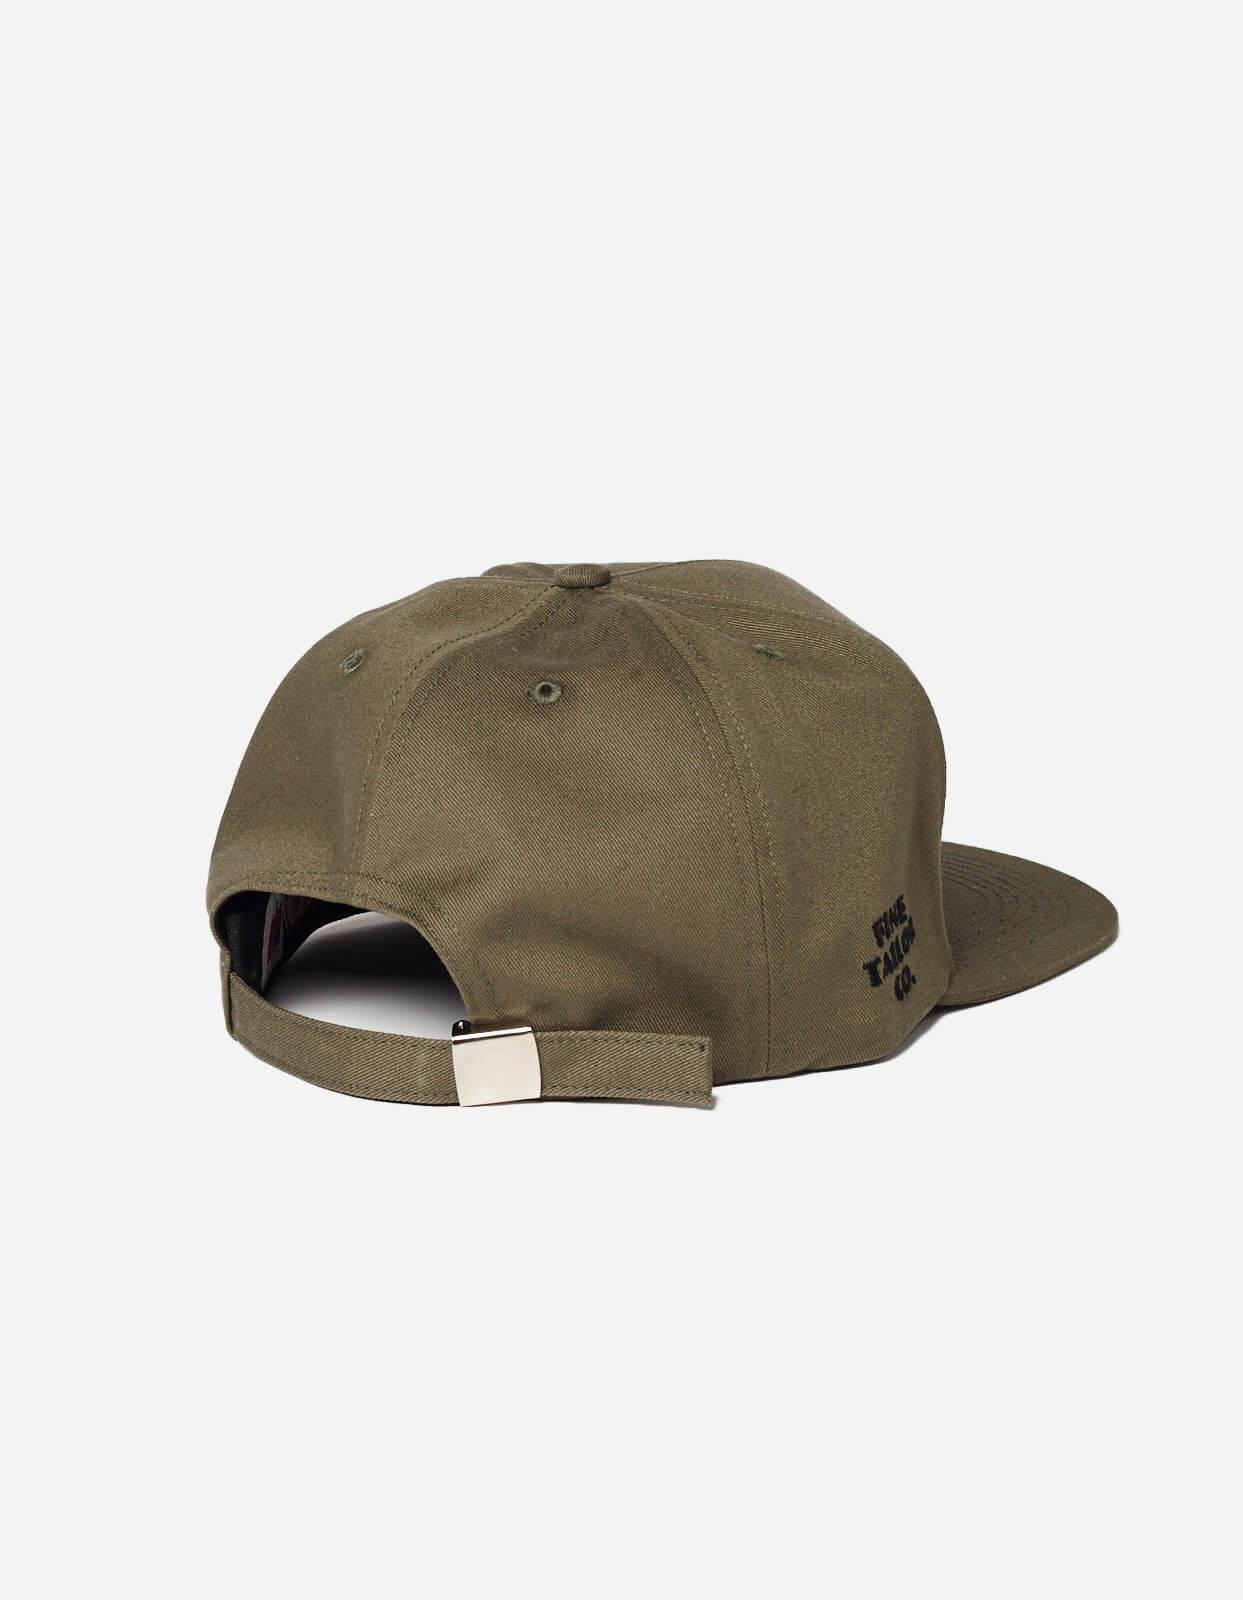 SS21_9340_TAILOR-CAP_Olive_30